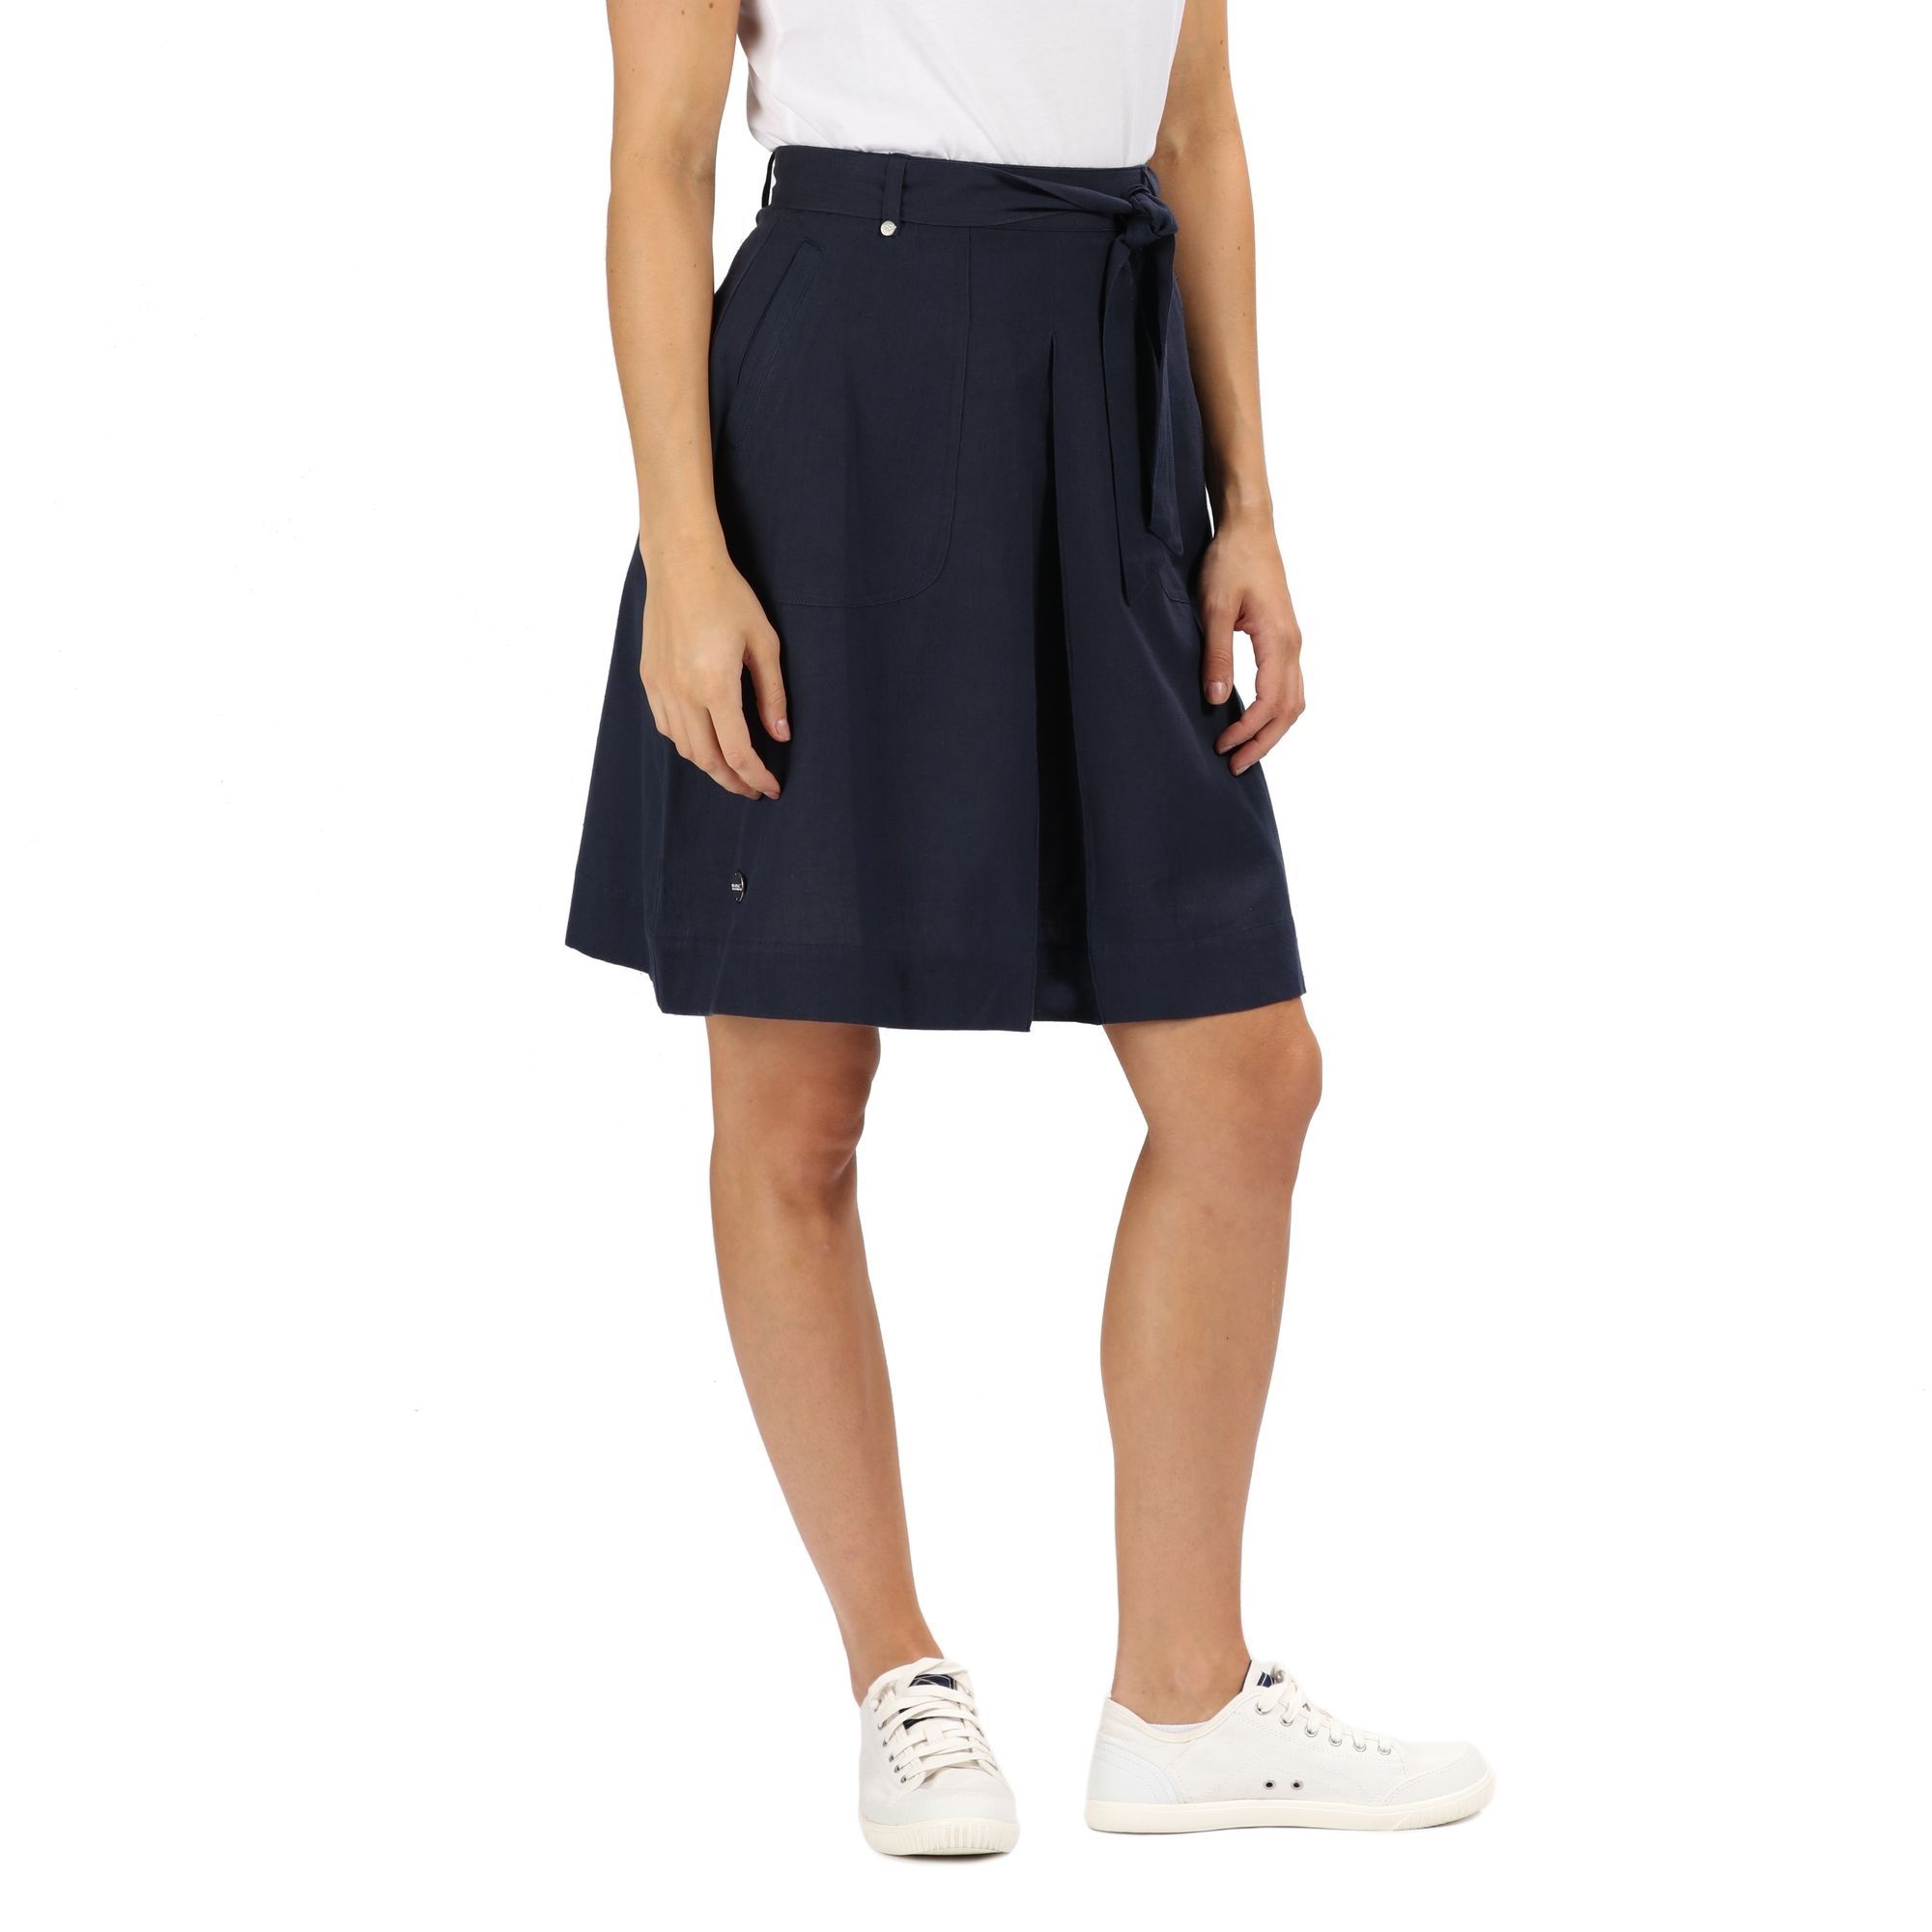 90% Coolweave cotton, 10% linen fabric. Knee-length with a box-pleat for a slightly flared fit. 2 side pockets. Zipped waist fastening with a tie on front. Drawcord waist adjuster. Garment washed for softer handle.